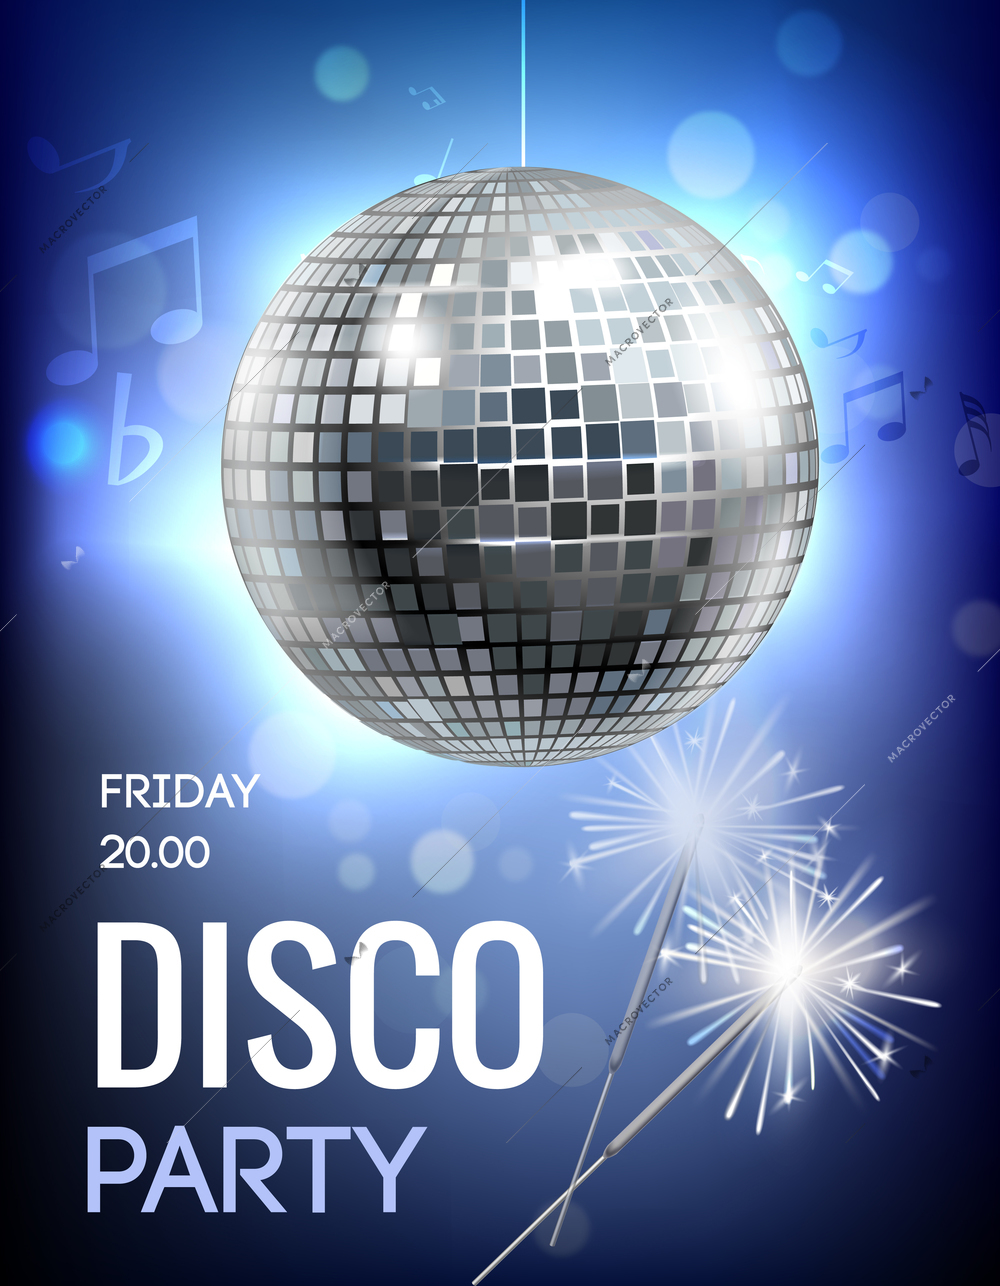 Party invitation poster with disco ball in spot lights vector illustration